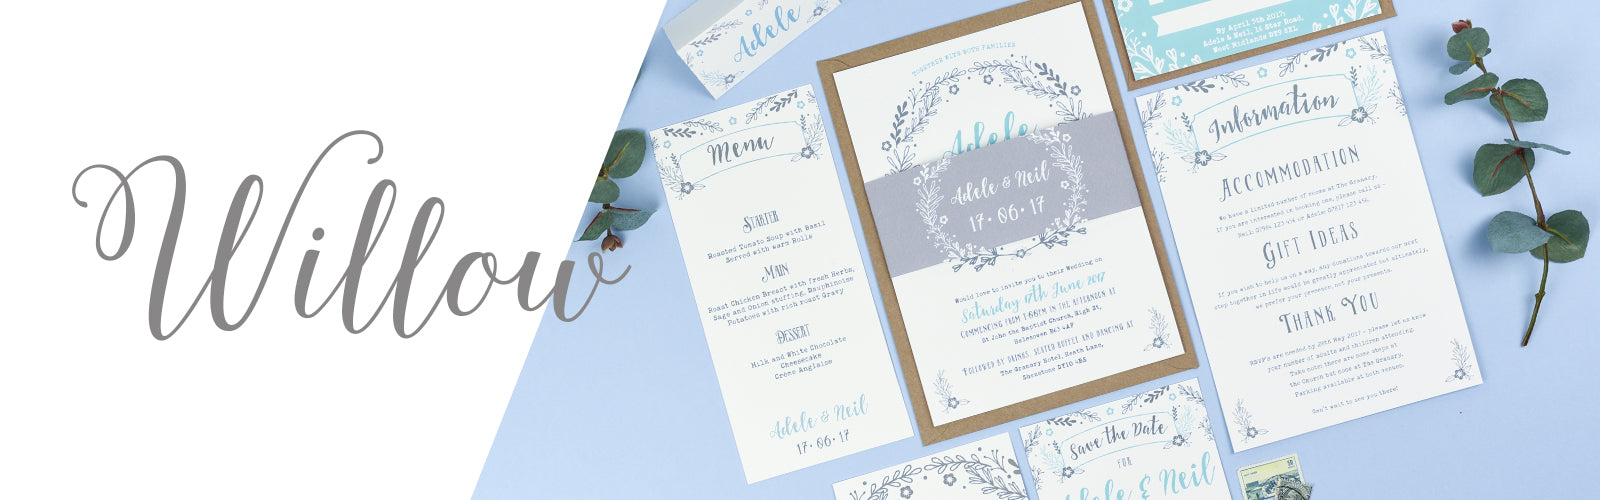 Willow Wedding Collection